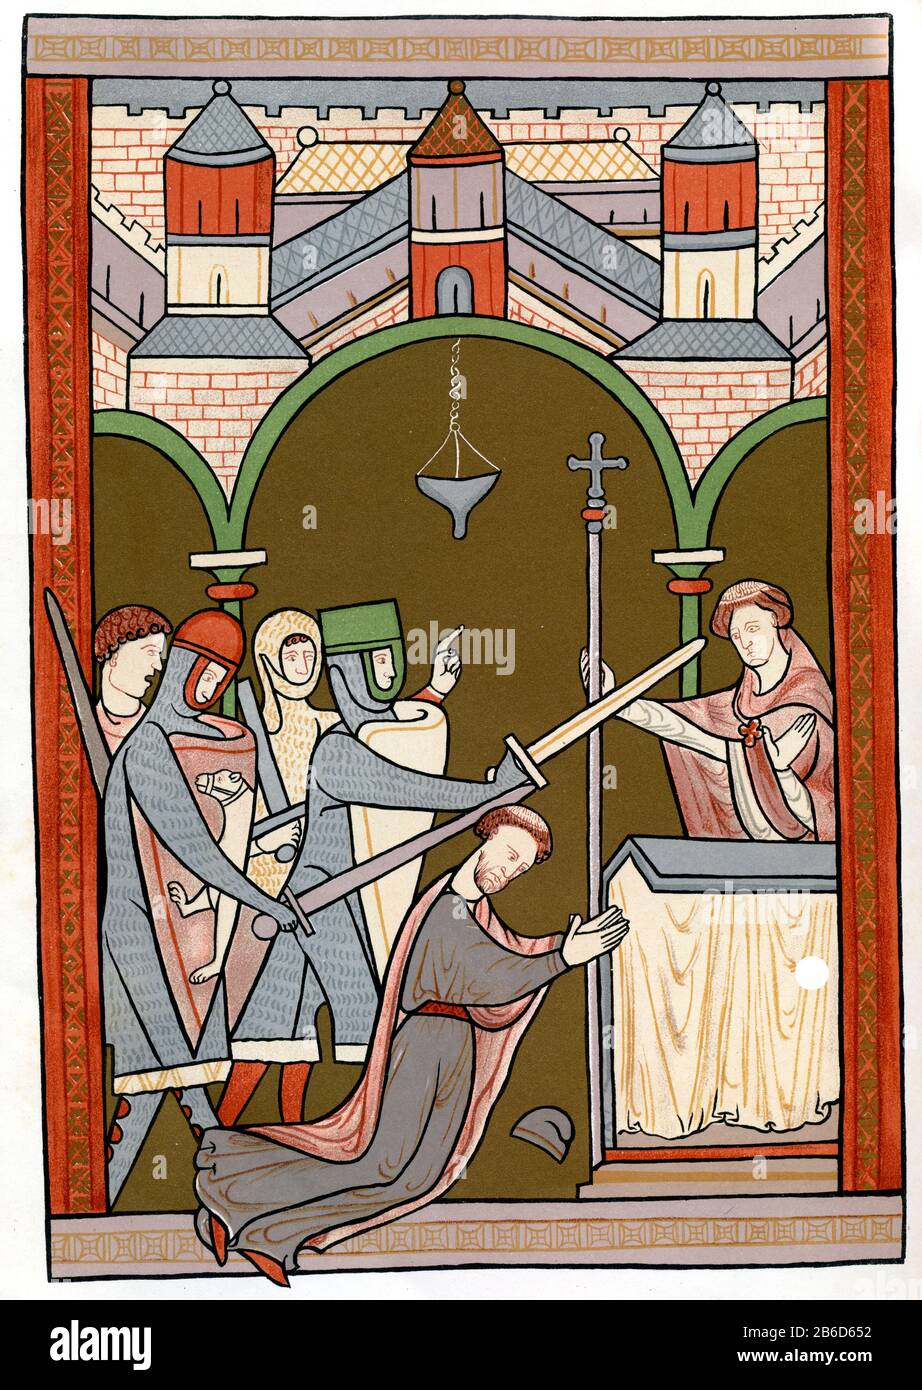 Martyrdom of St Thomas, early 13th century. MS. Harl 5102 (British Library). Thomas Becket, also known as Saint Thomas of Canterbury, Thomas of London and Thomas à Becket (c1119-1170). Becket was Archbishop of Canterbury from 1162 until his murder in 1170. This is the earliest known portrayal of Thomas Becket's murder in Canterbury Cathedral. Stock Photo